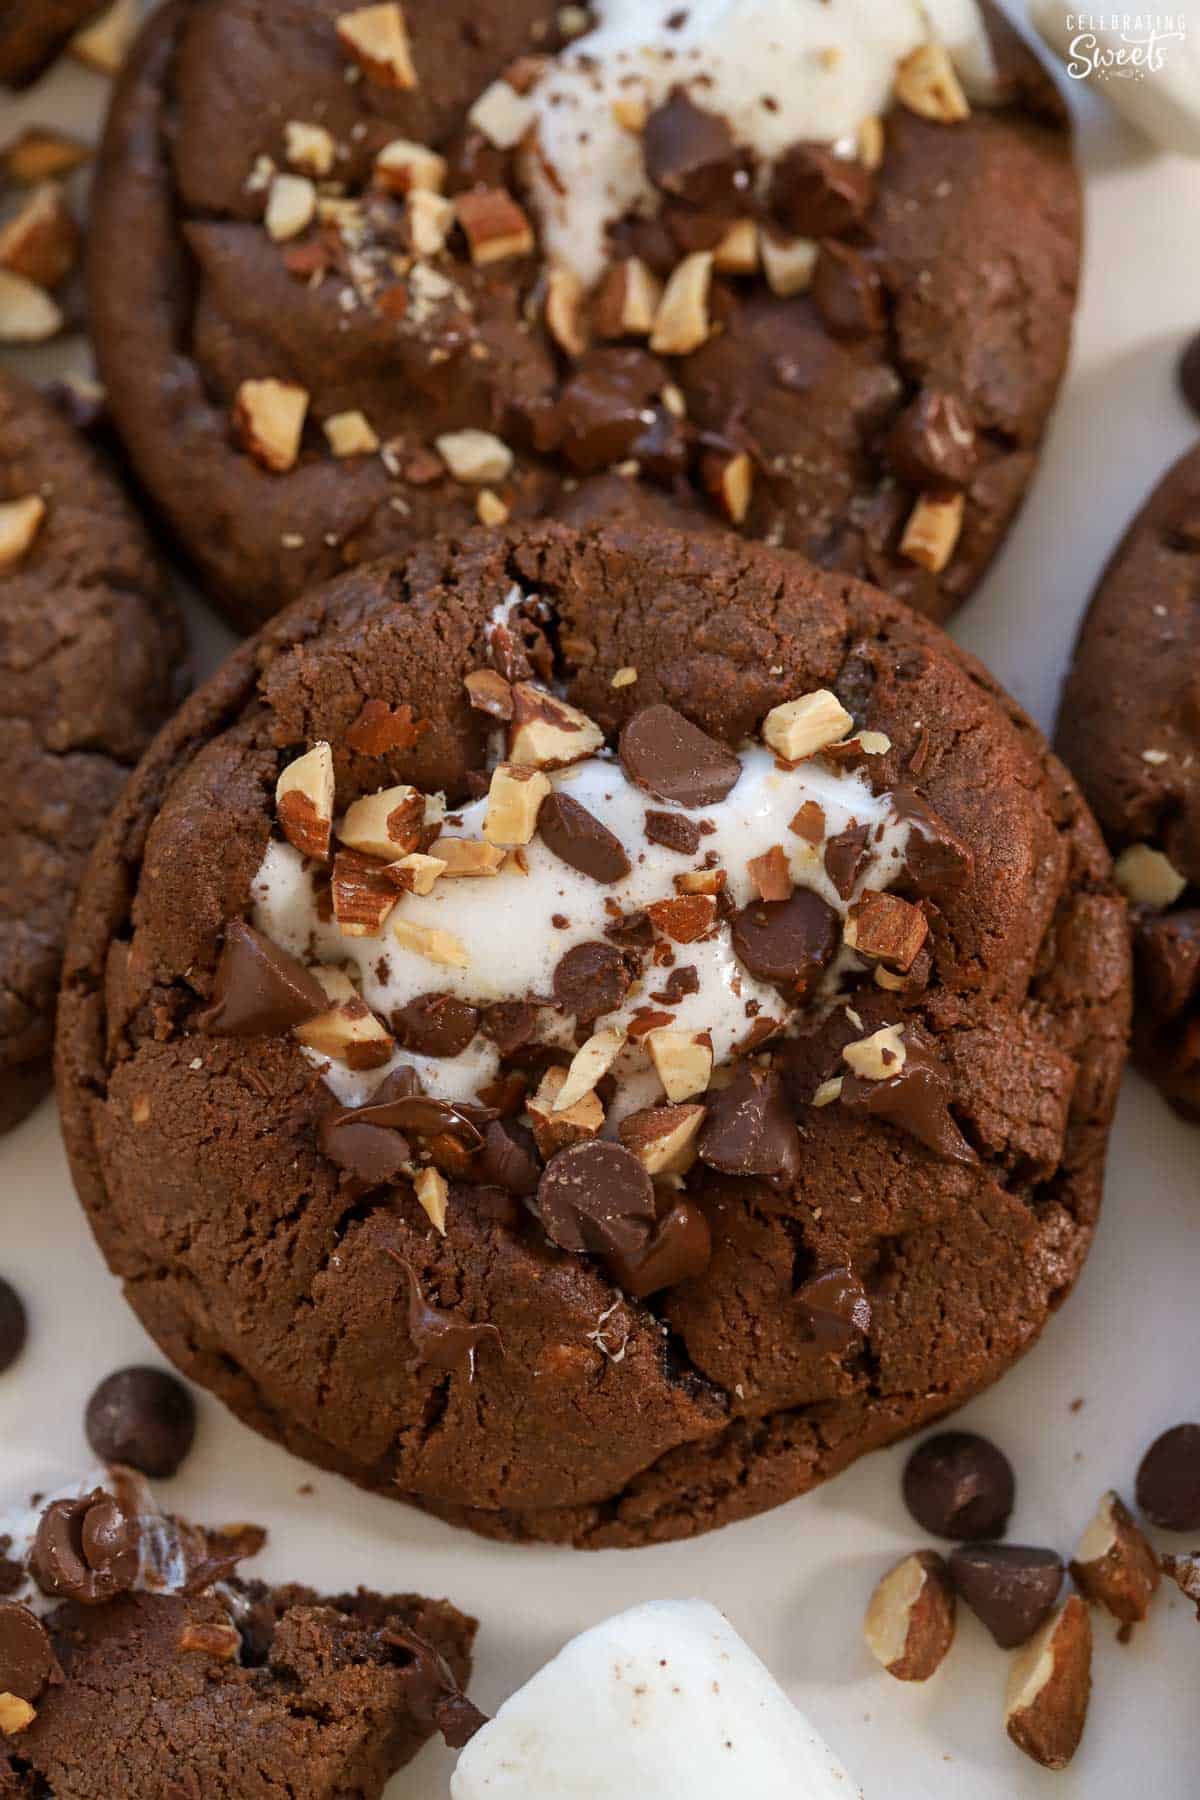 Chocolate cookie topped with marshmallows and nuts.